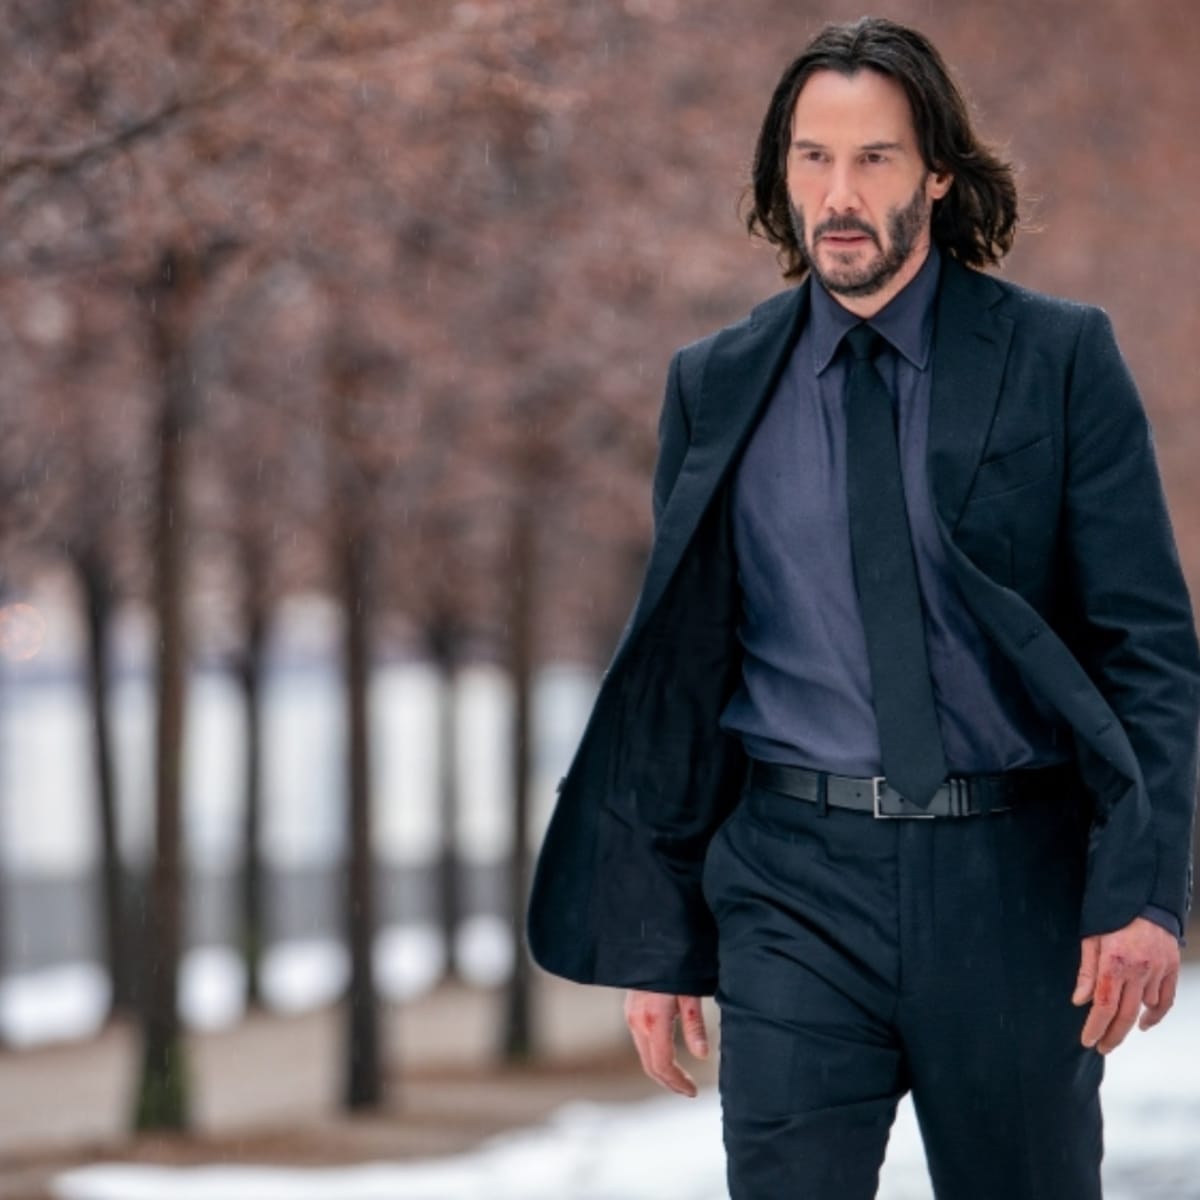 John Wick 4' Raises The Bar On Excellence And 'A Good Person' Amazes